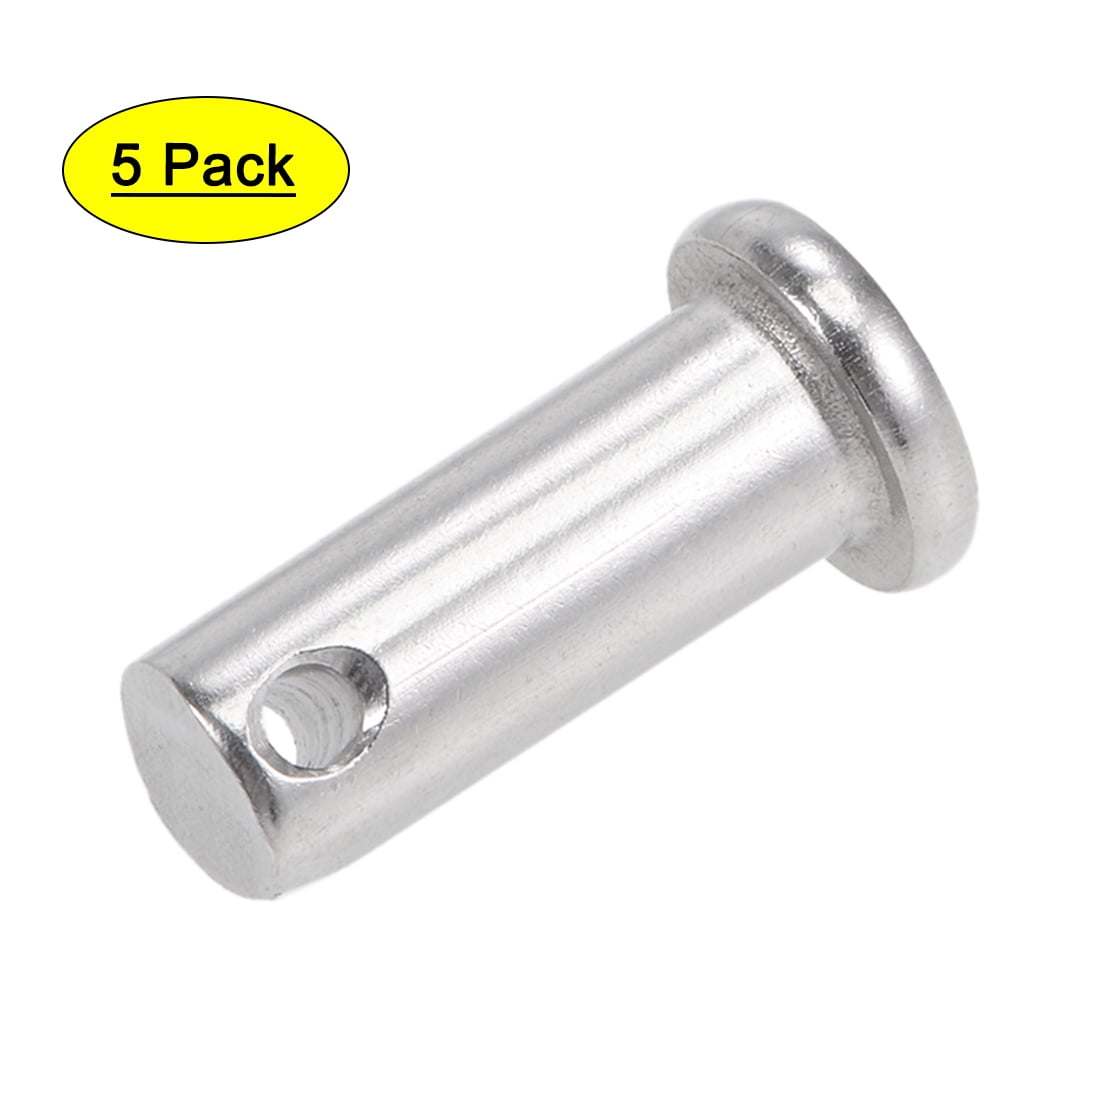 Single Hole Clevis Pins 10mm x 25mm Flat Head 304 Stainless Steel Pin 5Pcs 